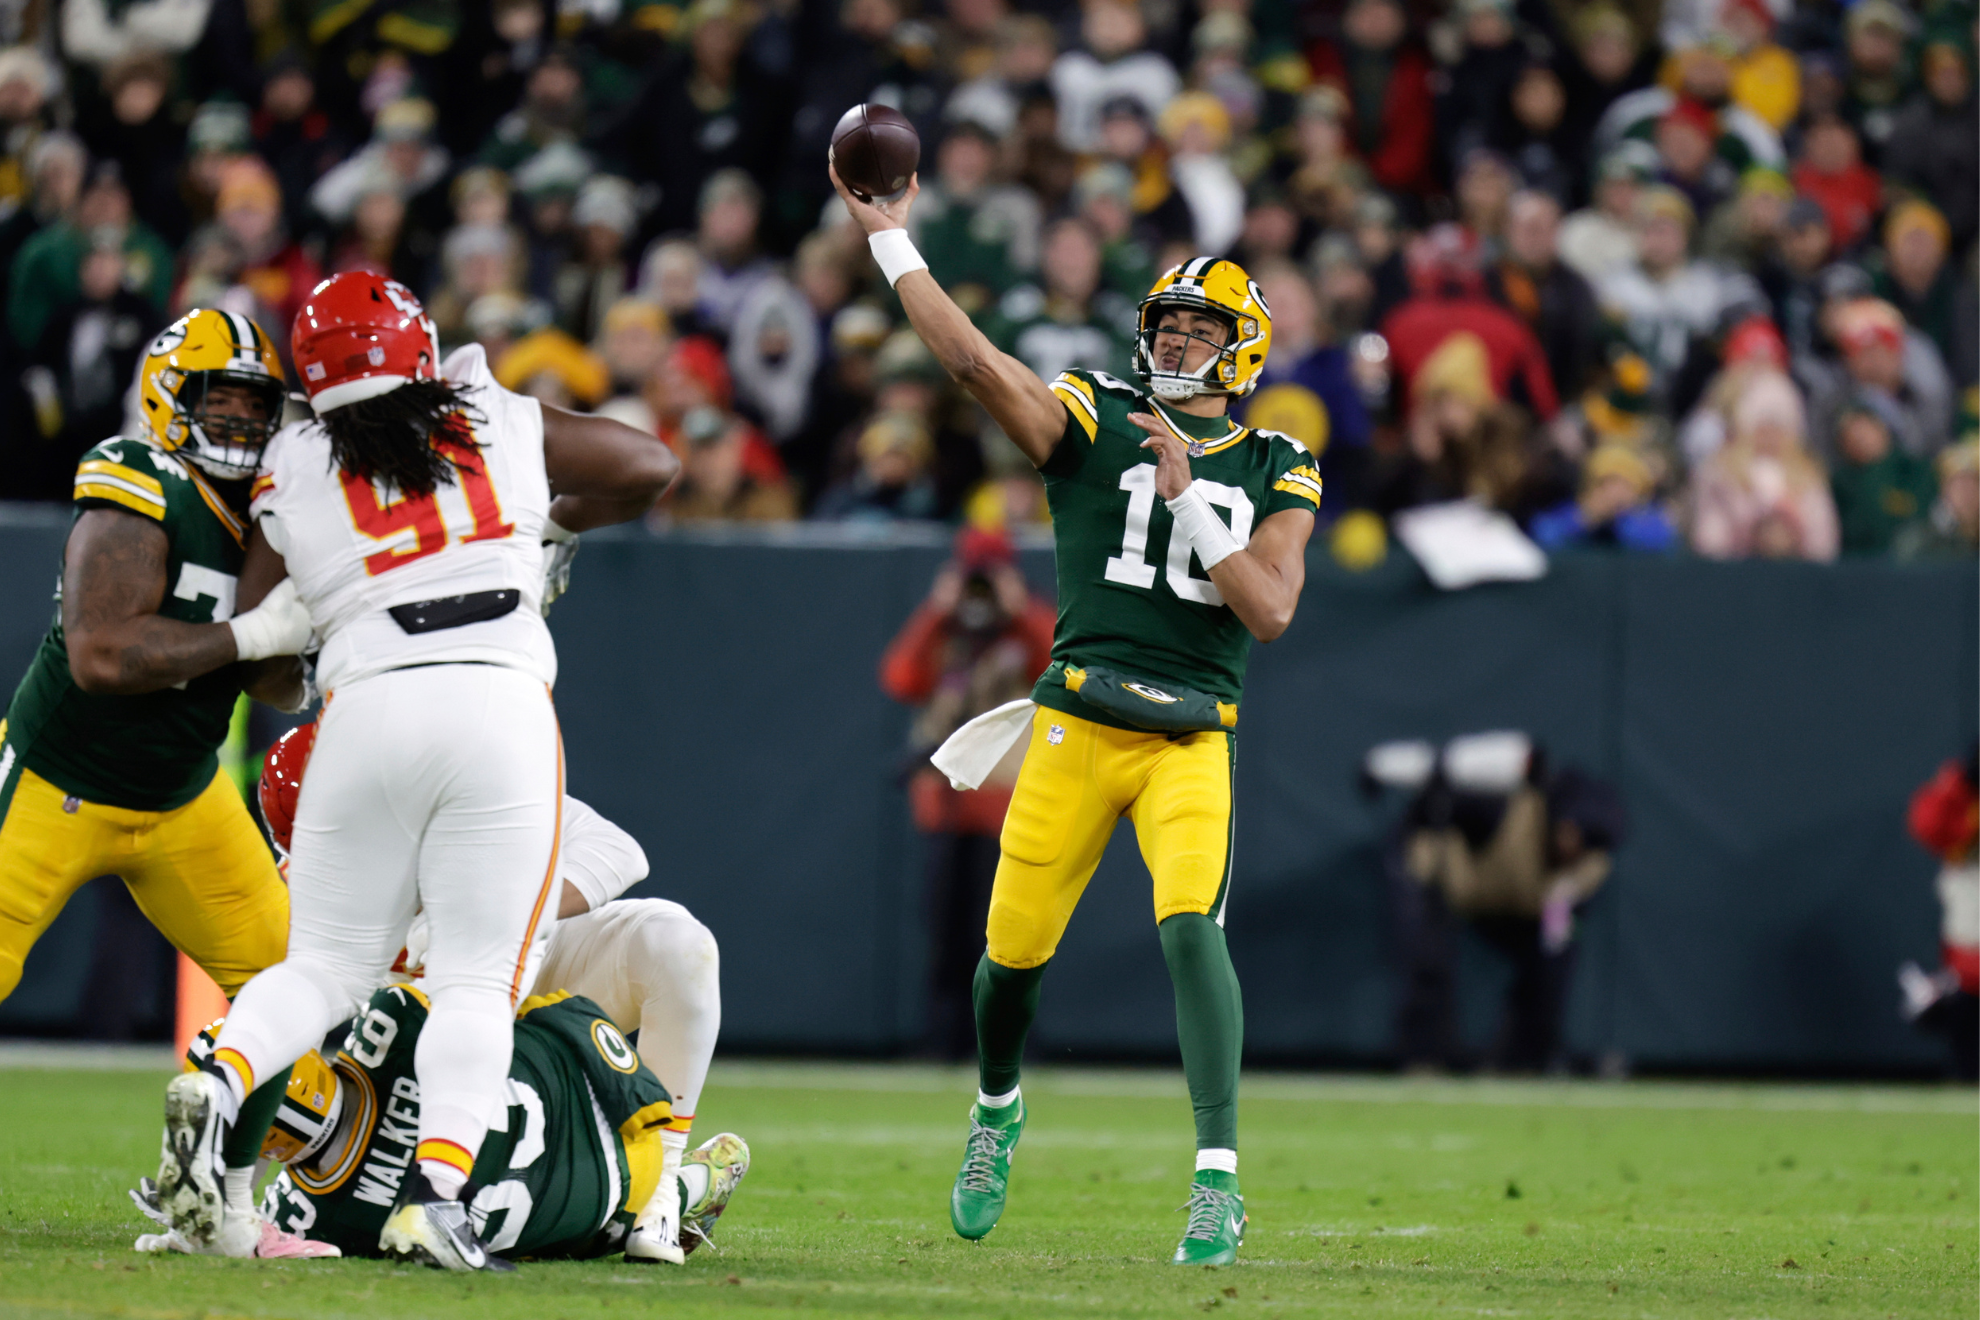 Jordan Love threw three more touchdown passes as the Packers upended the champs.